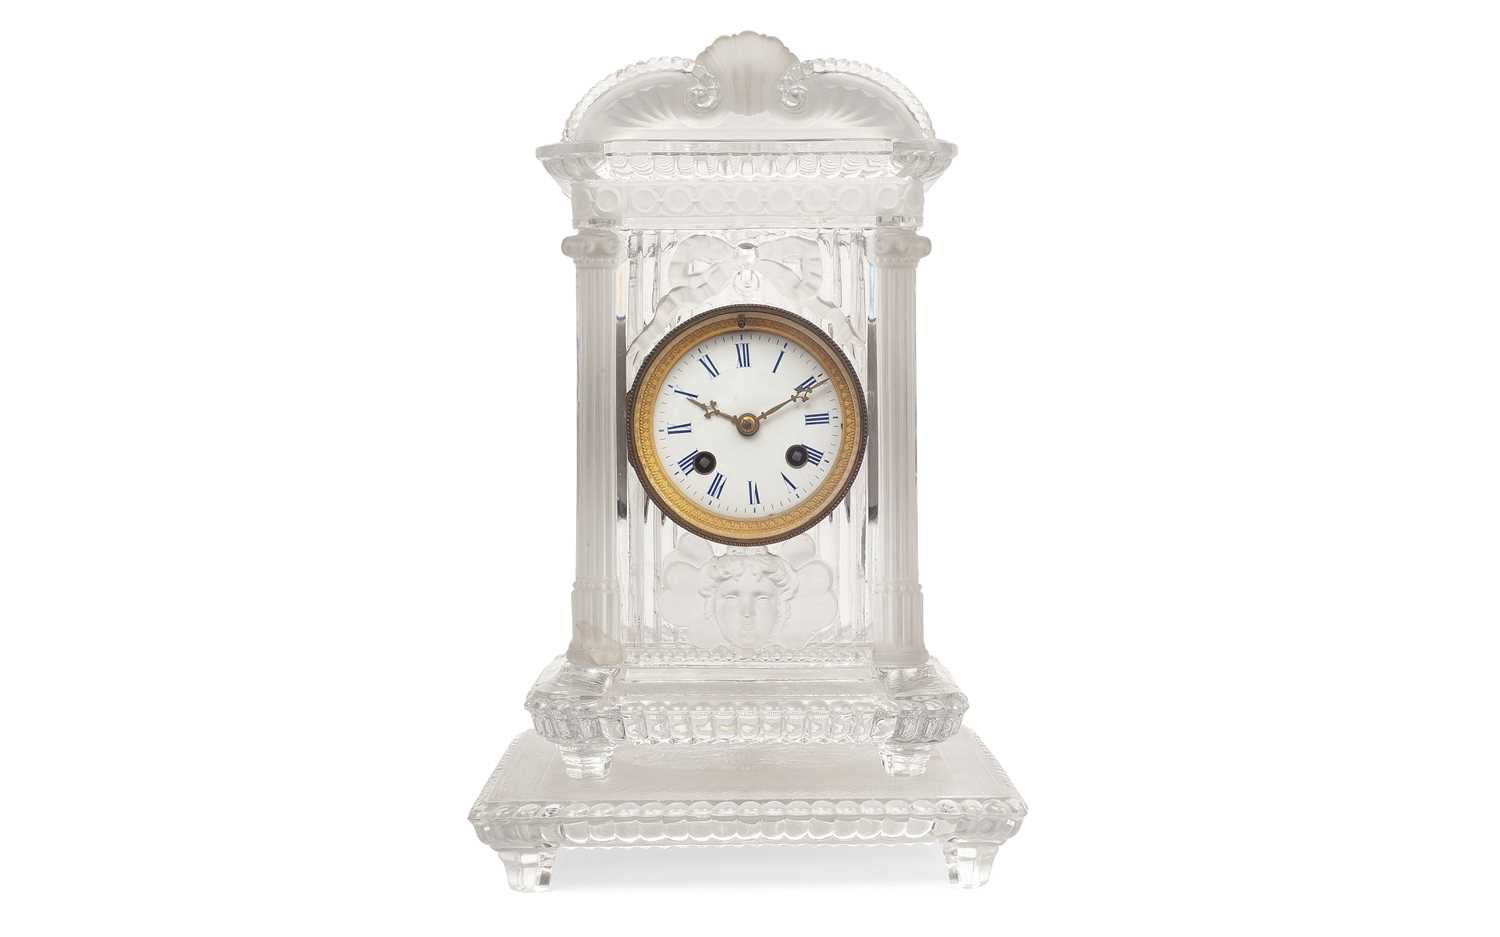 BACCARAT: A LATE 19TH CENTURY FROSTED AND CLEAR GLASS MANTEL CLOCK - Image 3 of 3